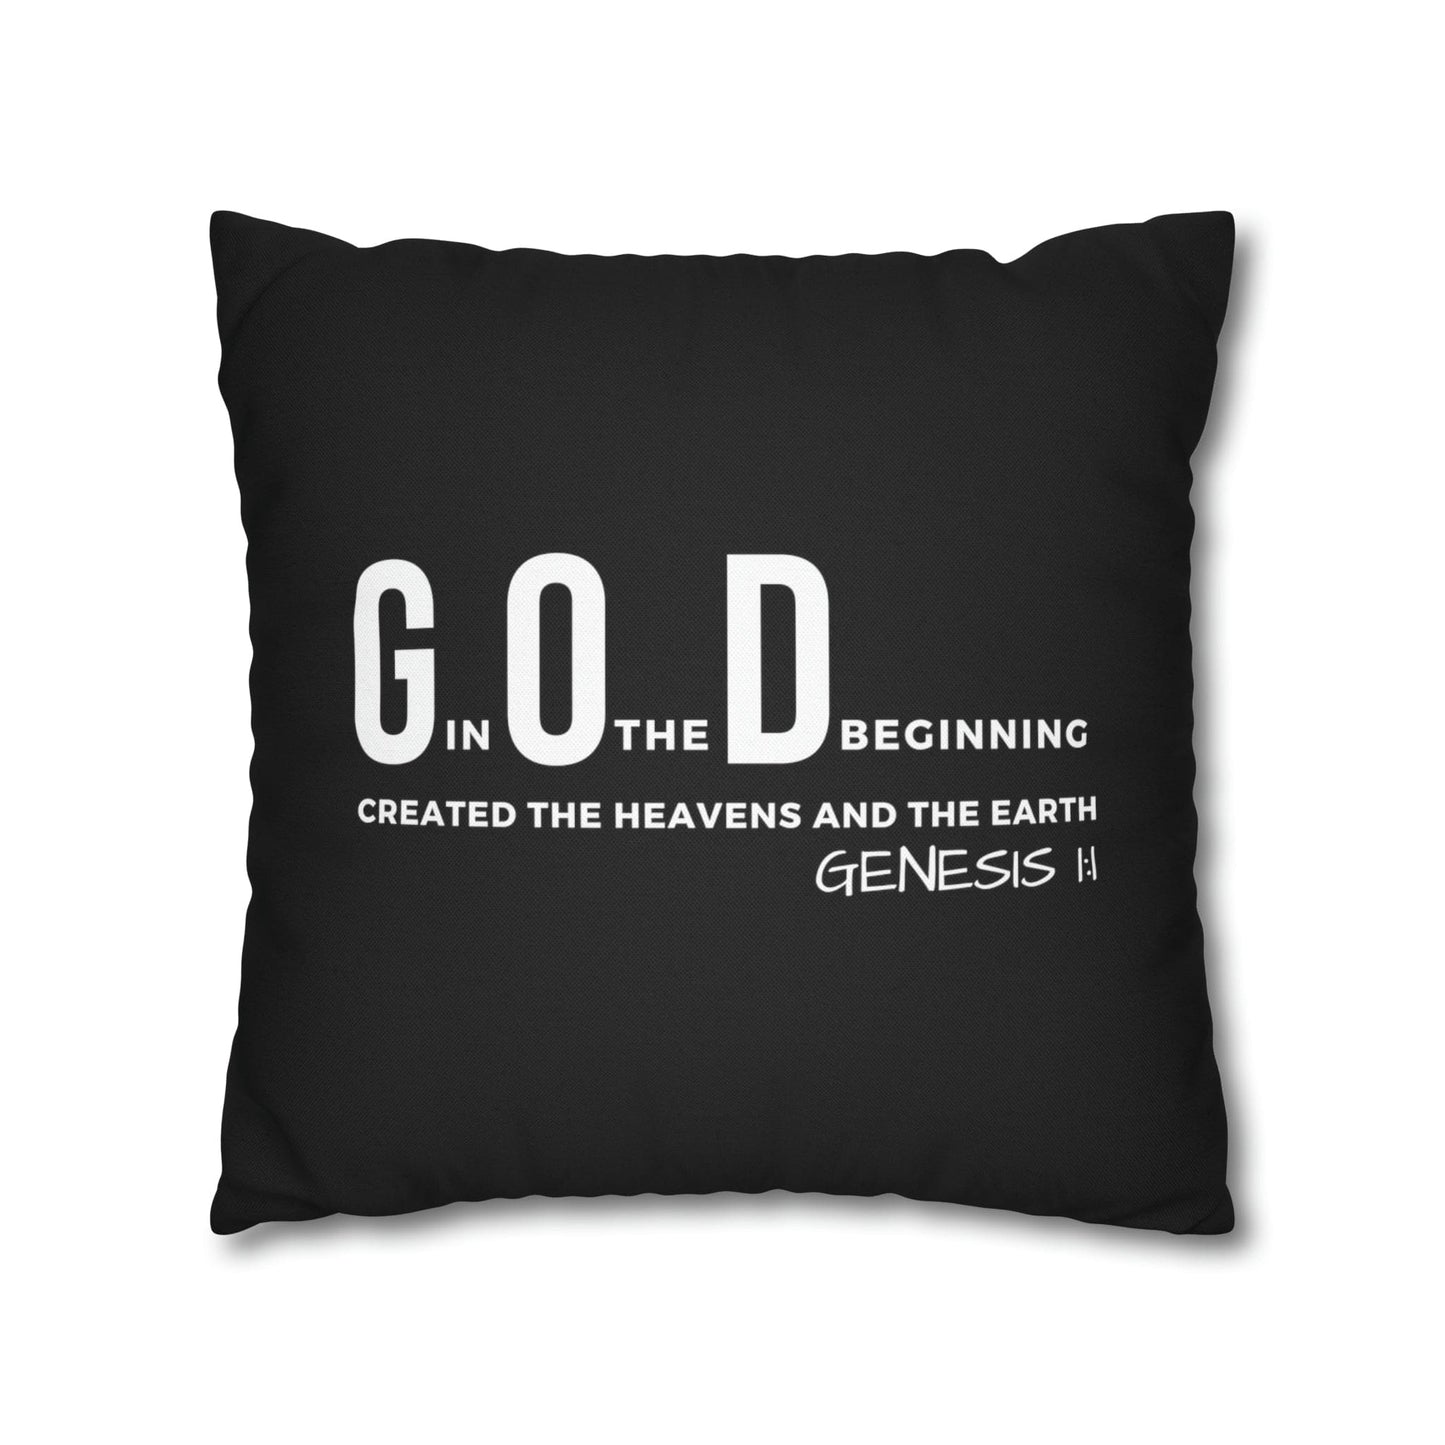 Decorative Throw Pillow Cover - Set Of 2, God In The Beginning Created The Heavens And The Earth - Scripture Verse-23